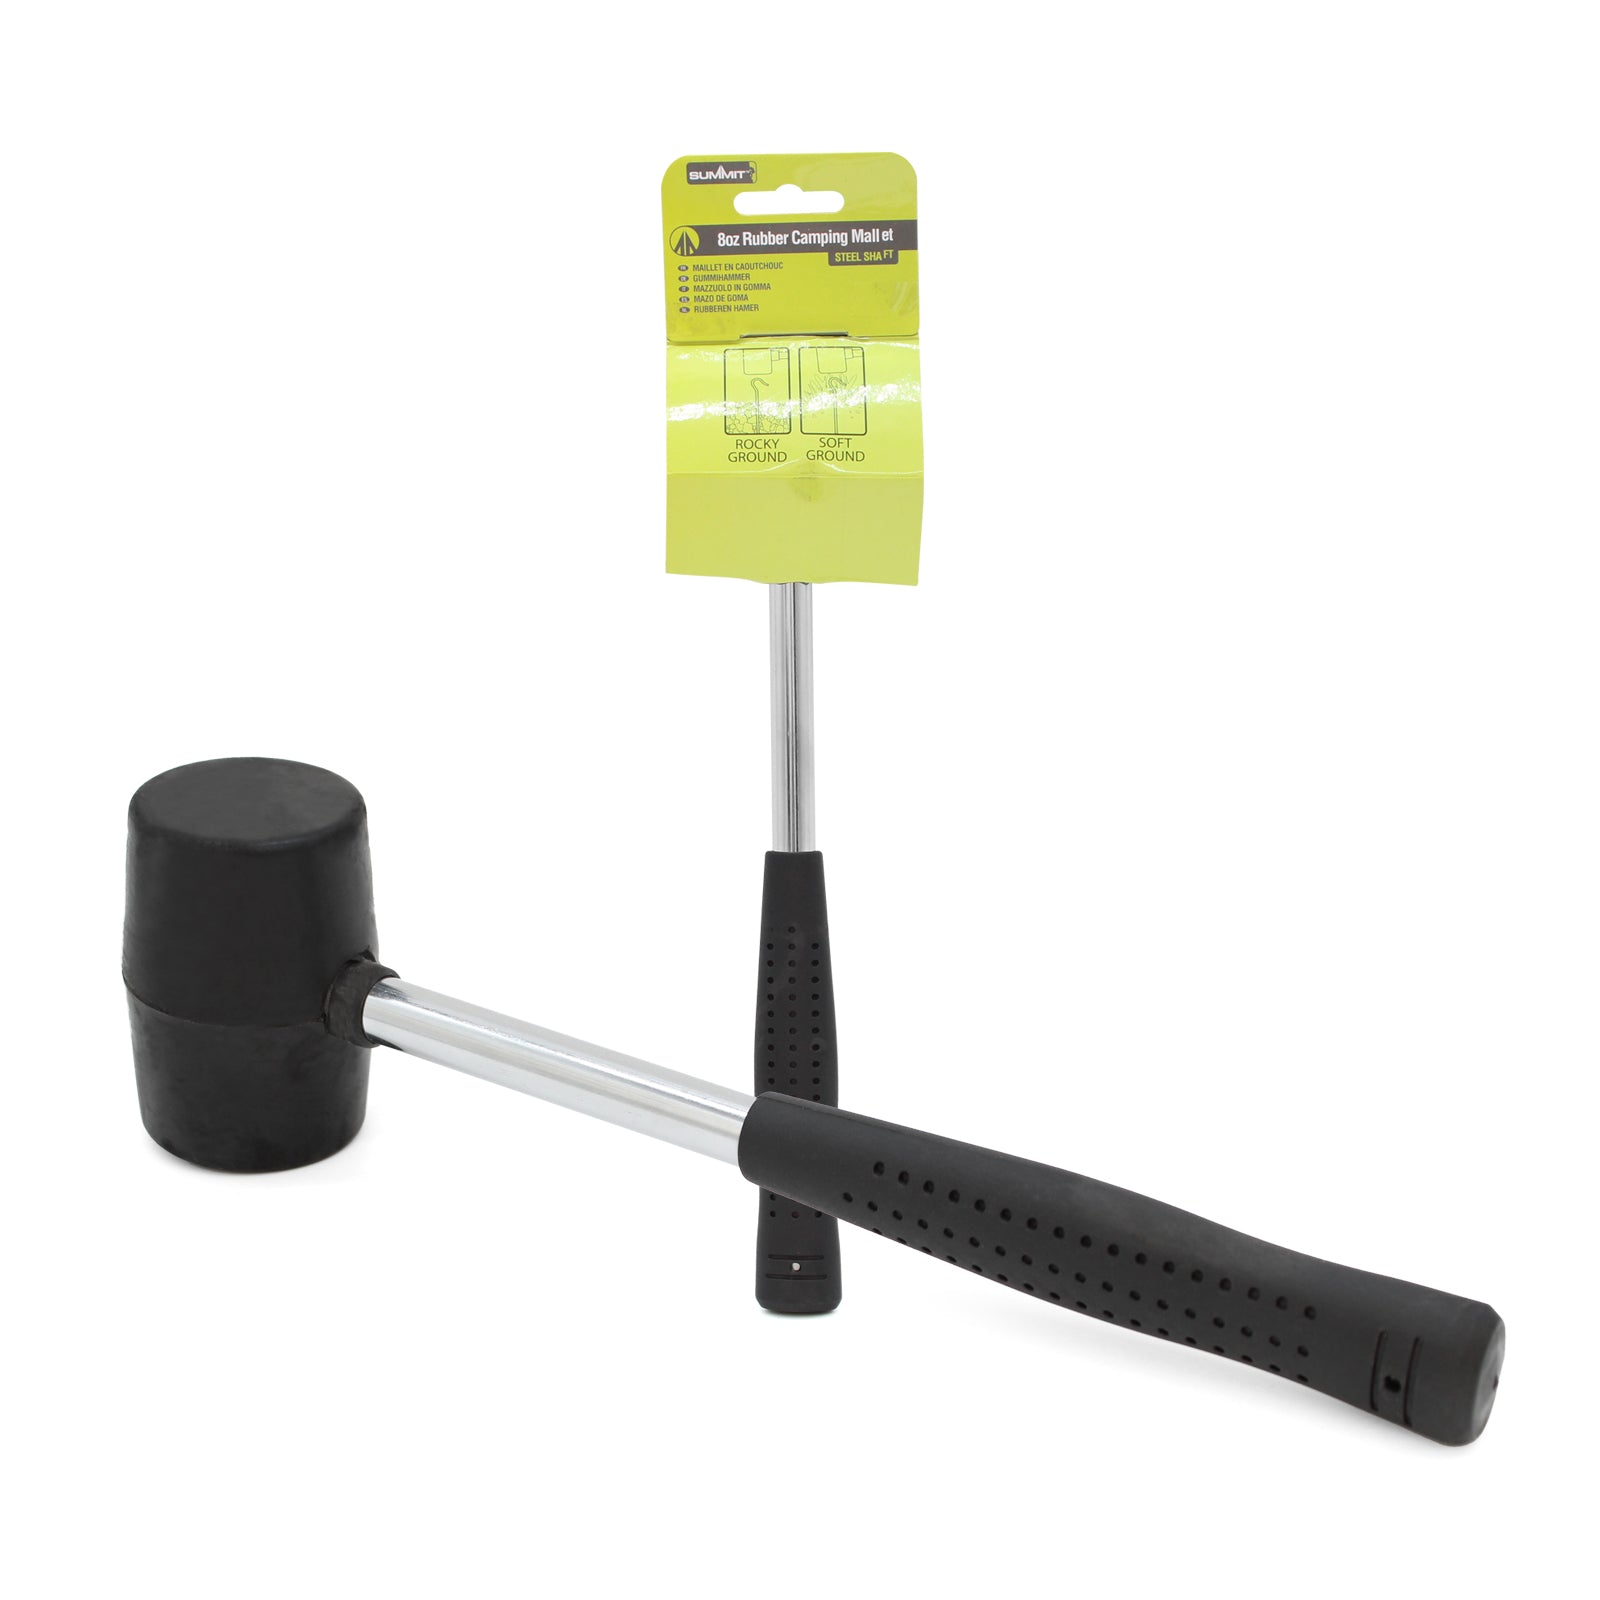 Rubber Camping Mallet for Tent Pegs